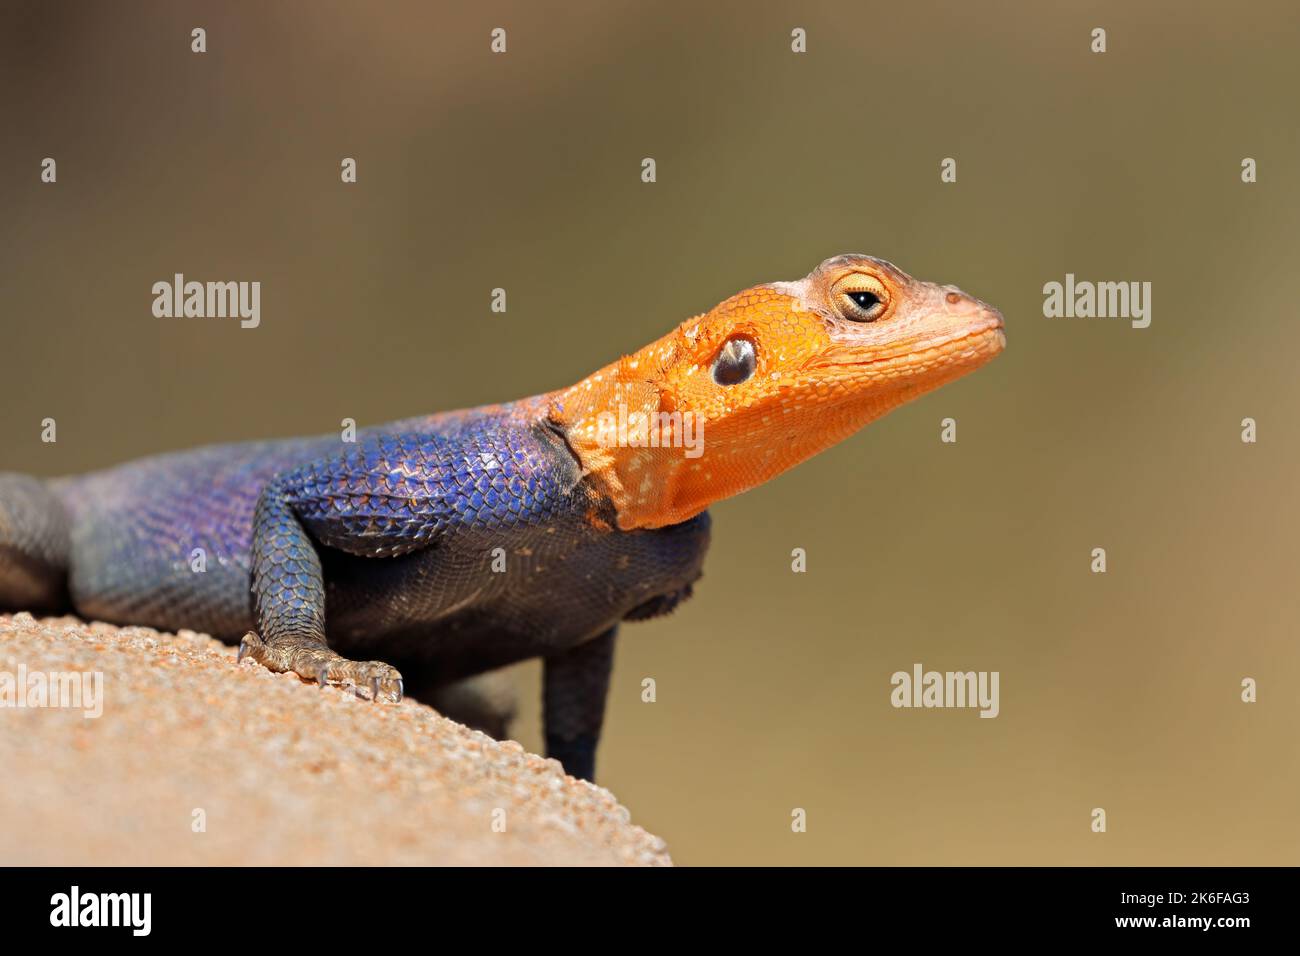 Portrait of a male Namib rock agama (Agama planiceps) in bright breeding colors, Namibia Stock Photo